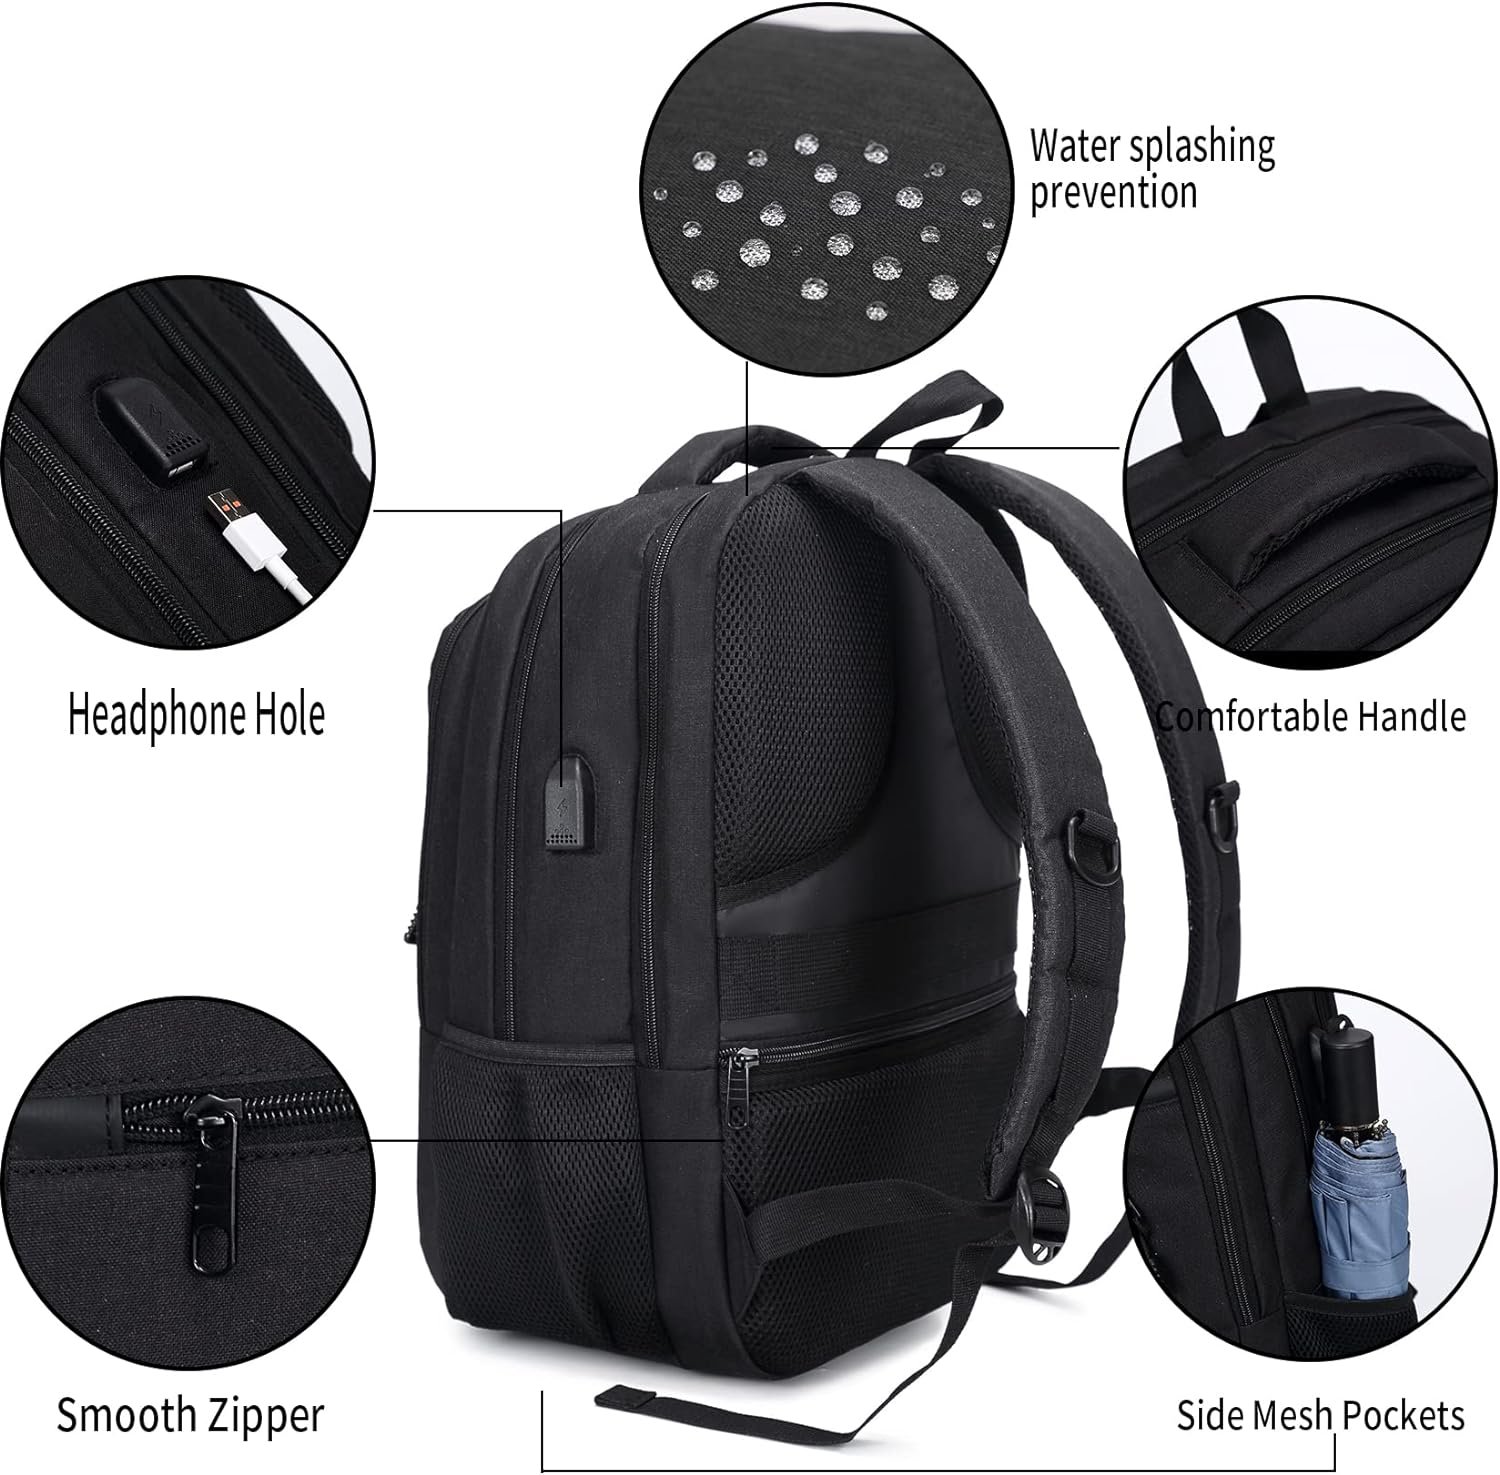 Monsdle Travel Laptop Backpack Review